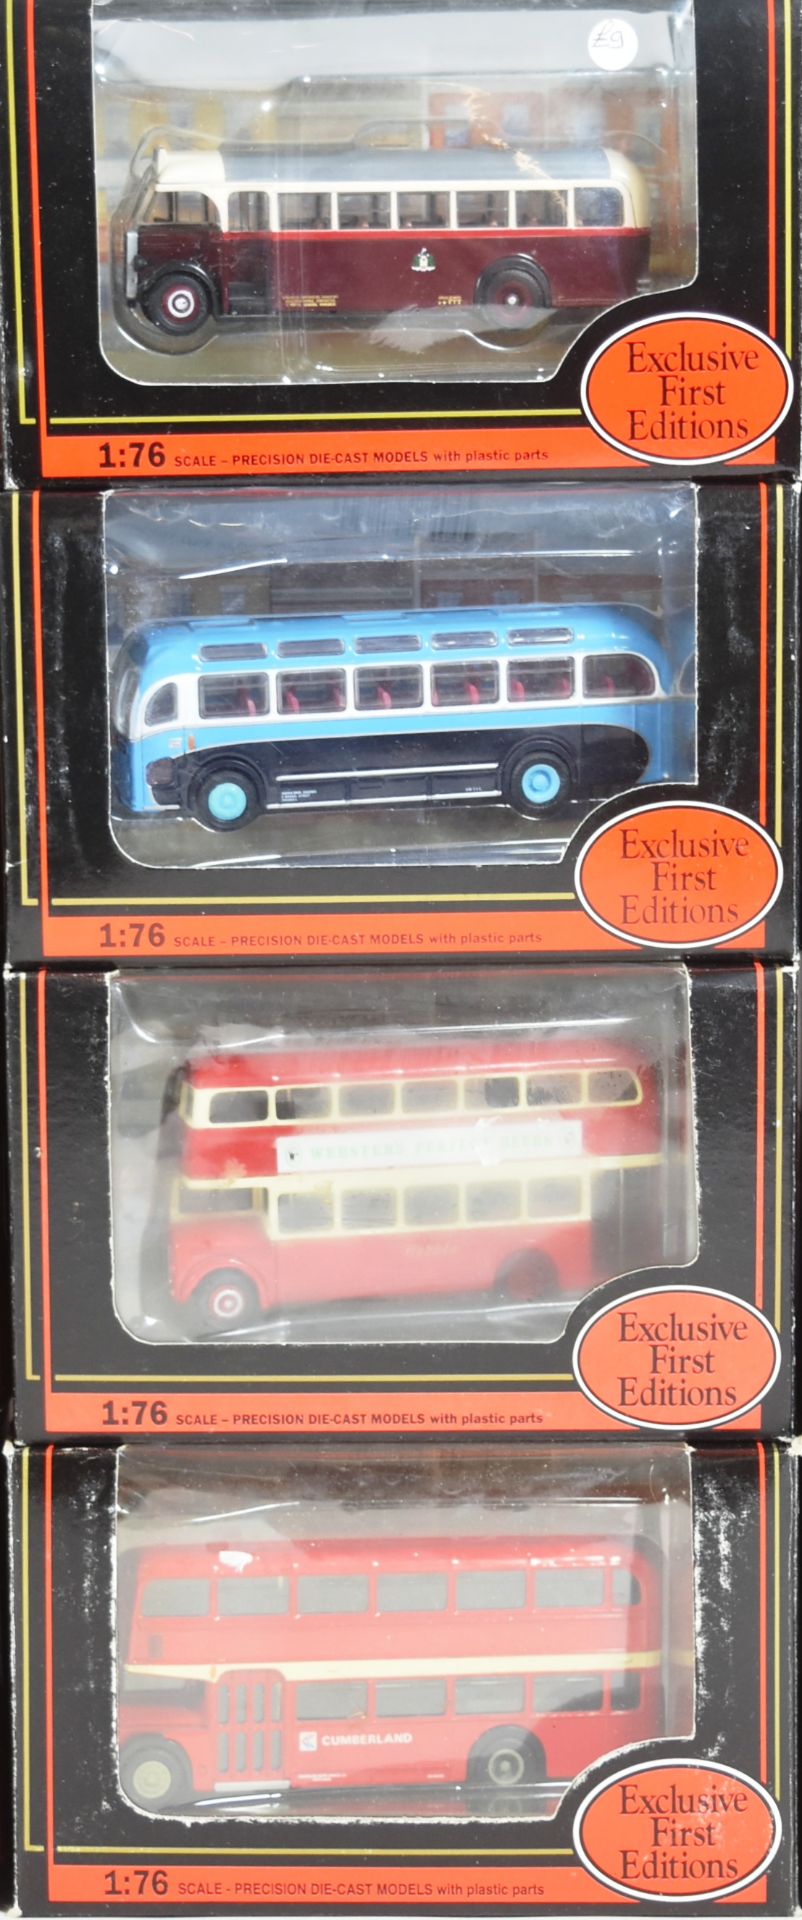 DIECAST - EFE EXCLUSIVE FIRST EDITIONS DIECAST MODEL BUSES - Image 5 of 6